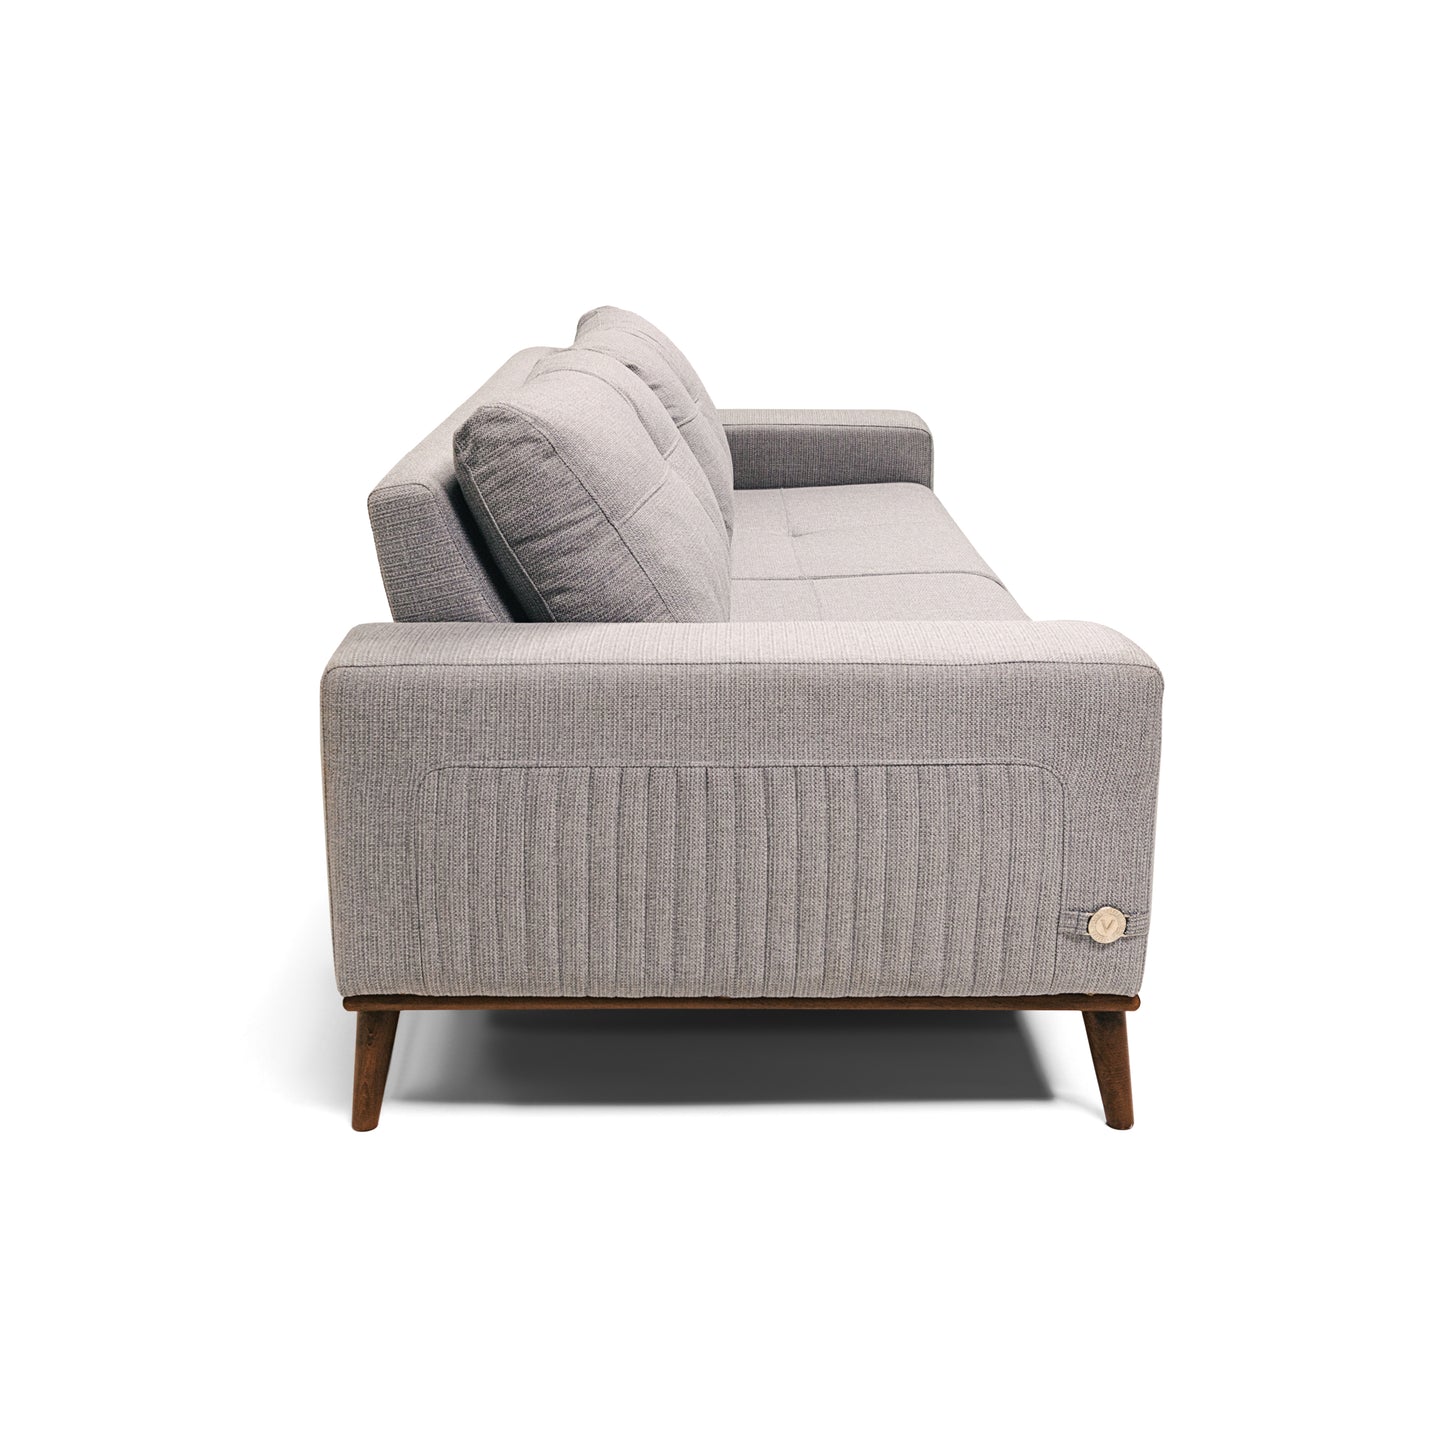 The Piper Large Sofa